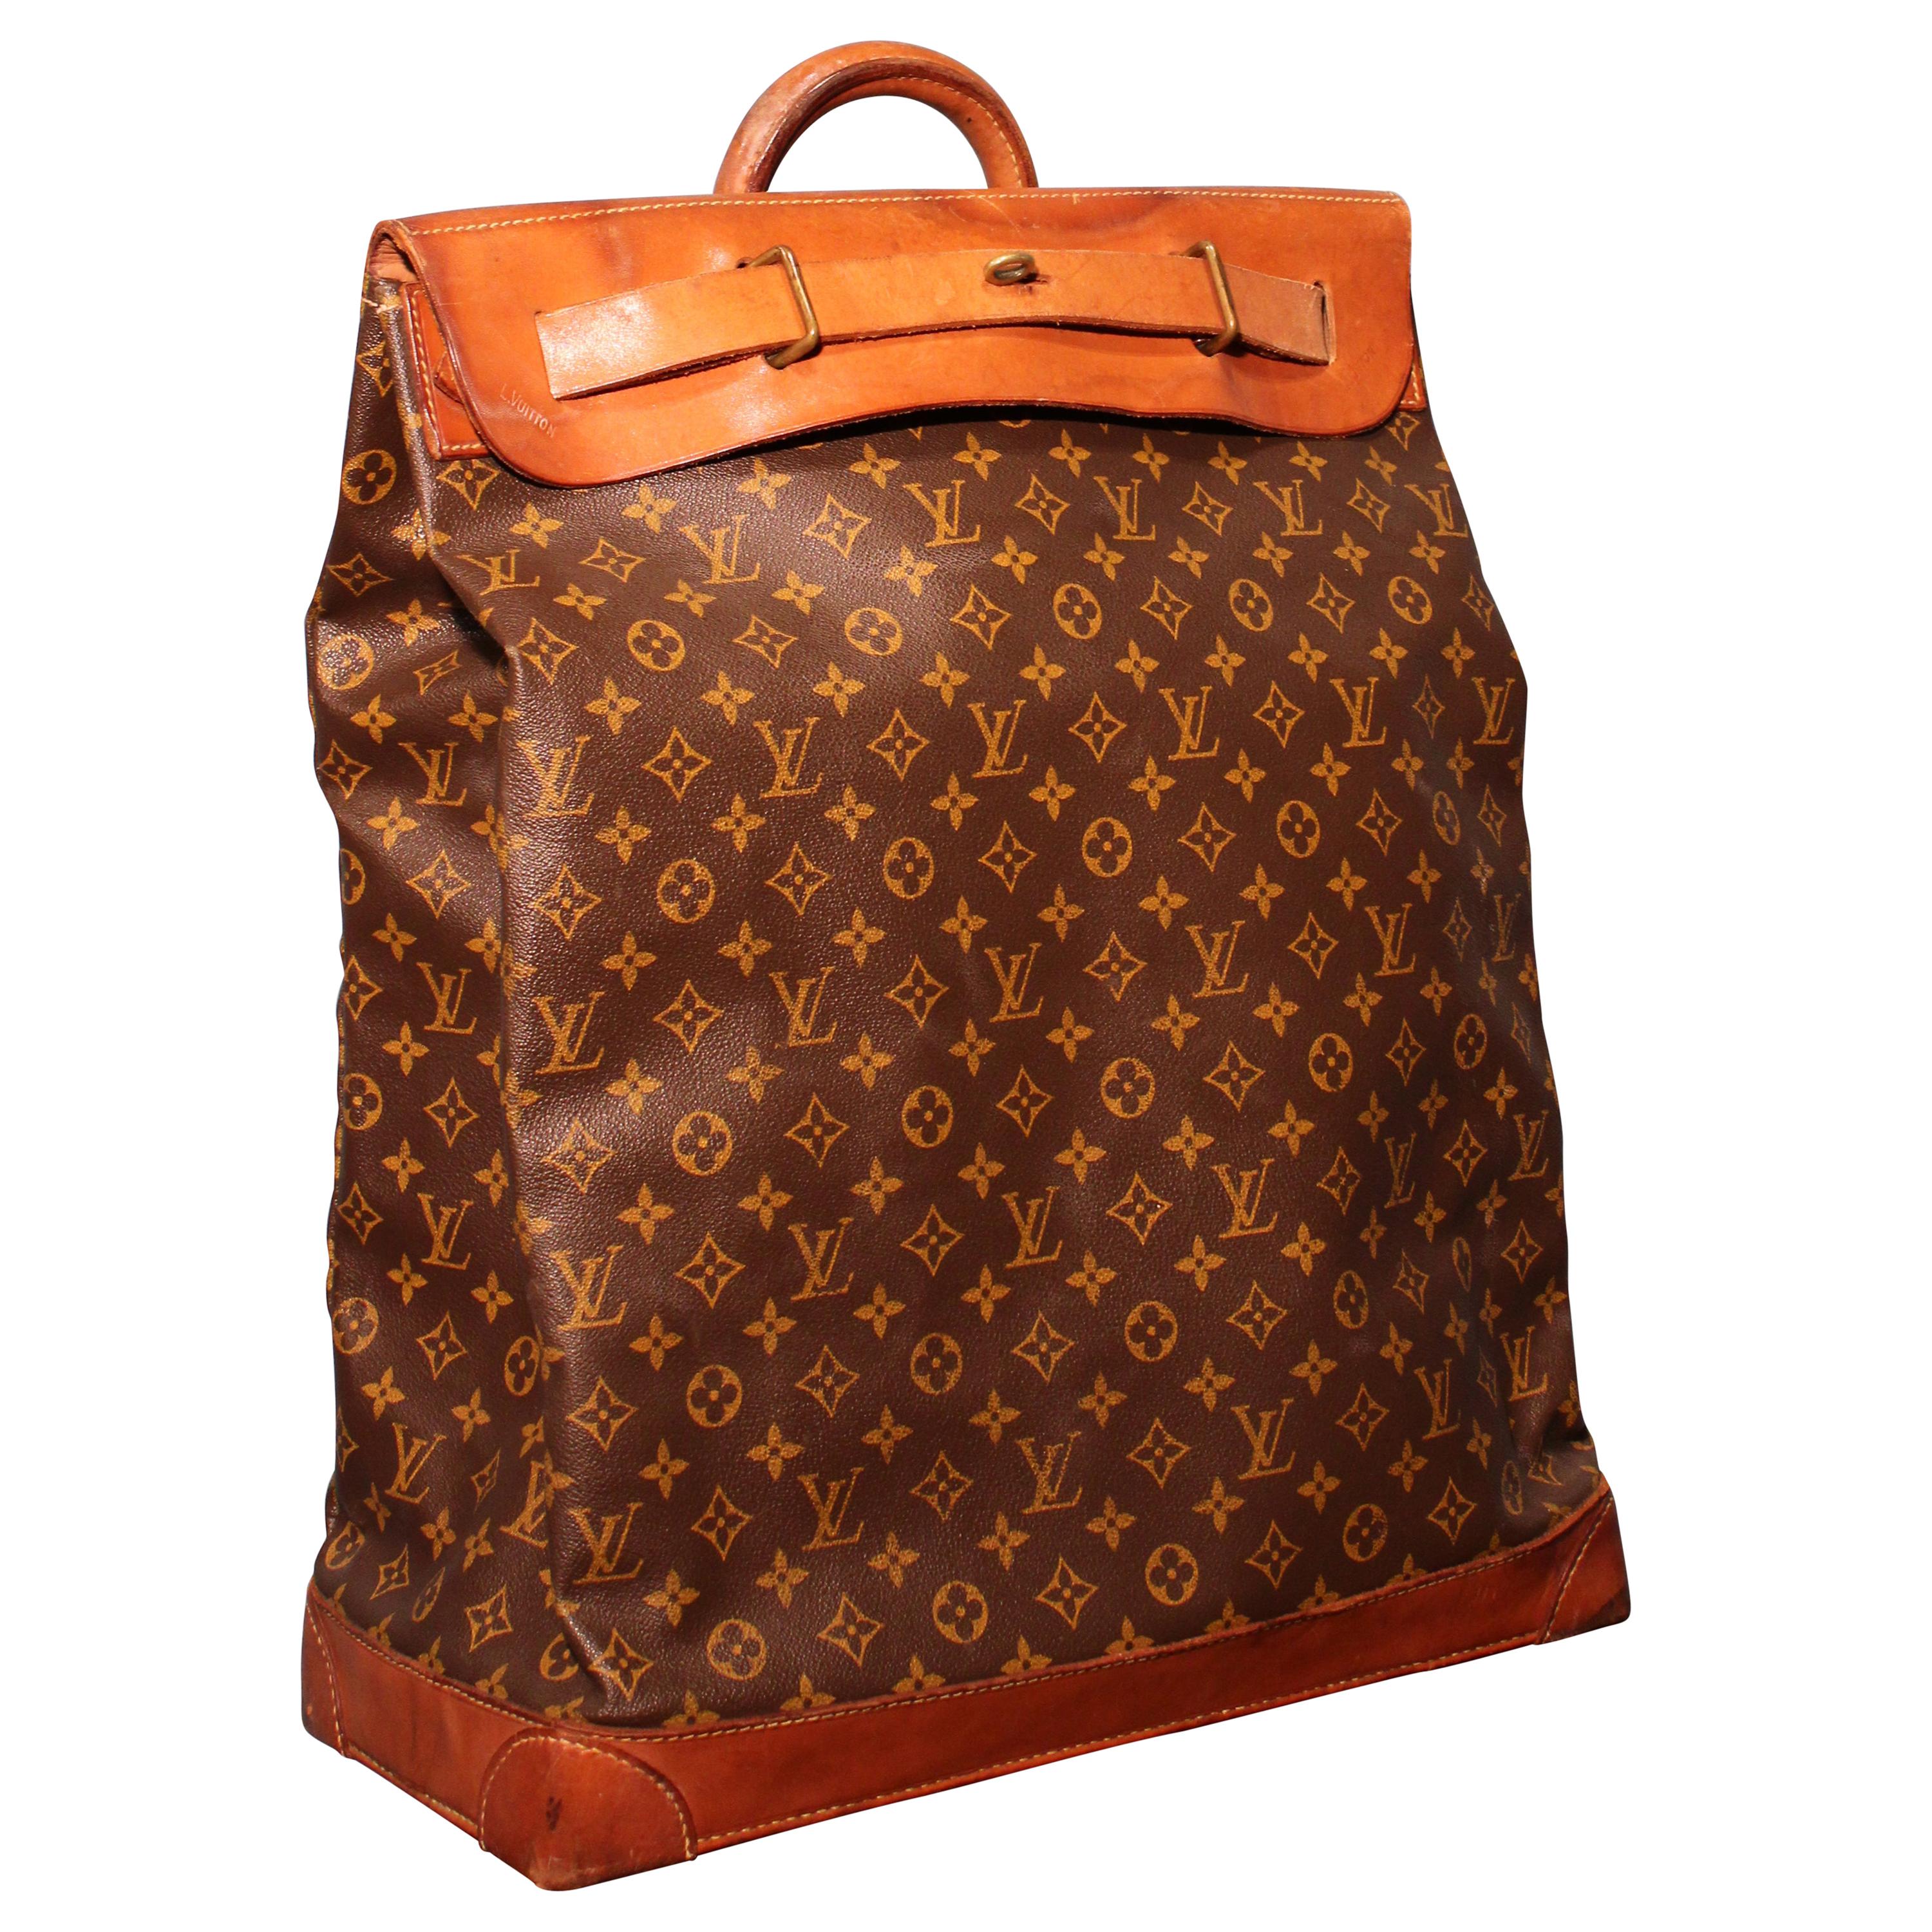 Vintage Louis Vuitton Duffle Bag For Sale at 1stDibs